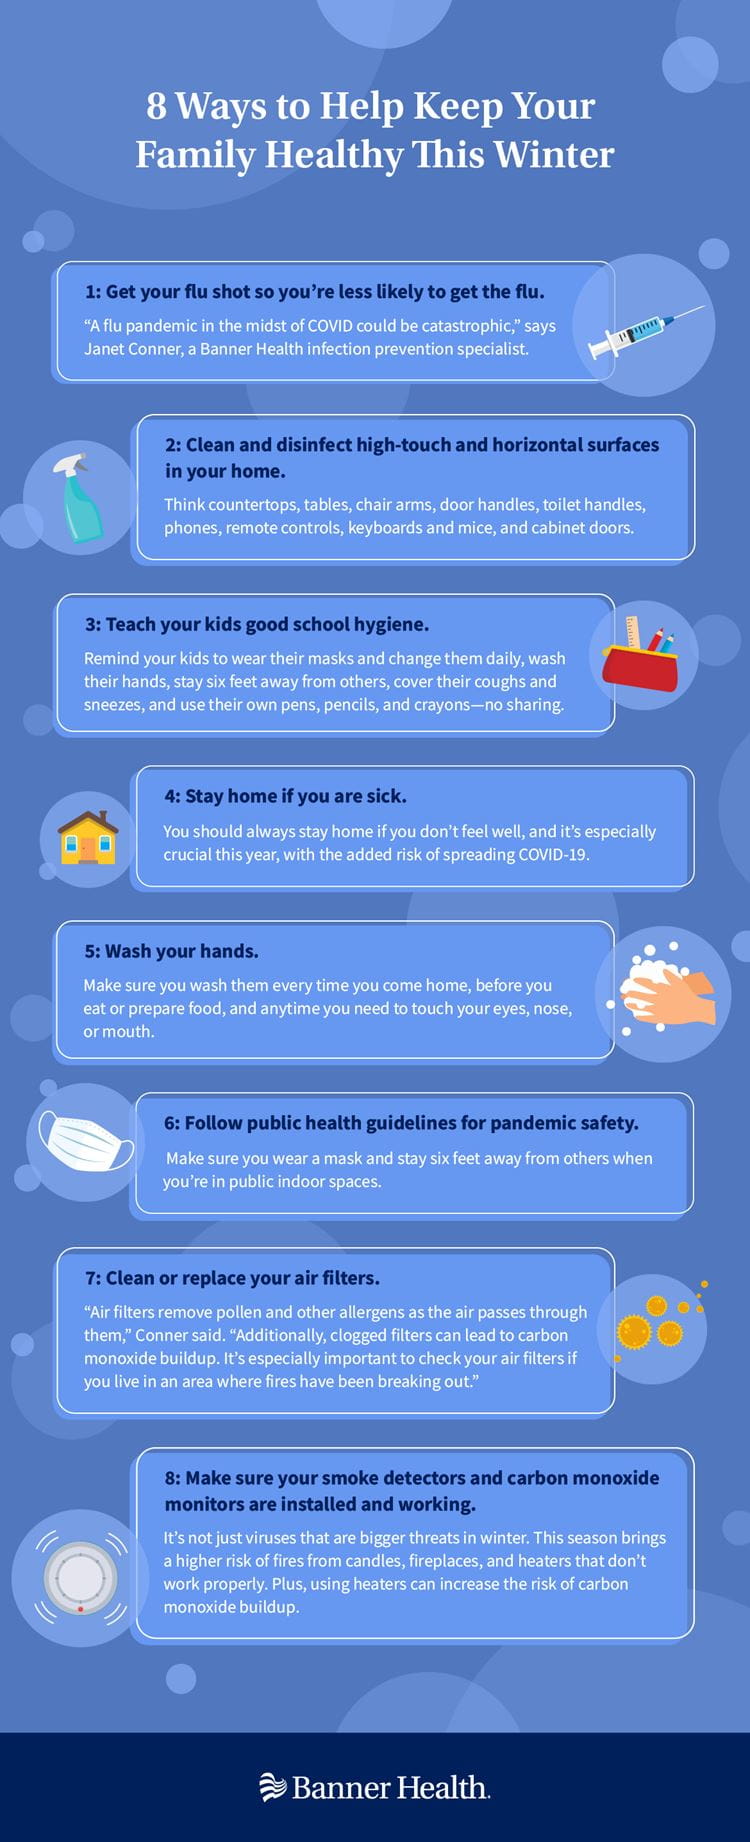 8 Ways to Keep Your Family Healthy This Winter Infographic